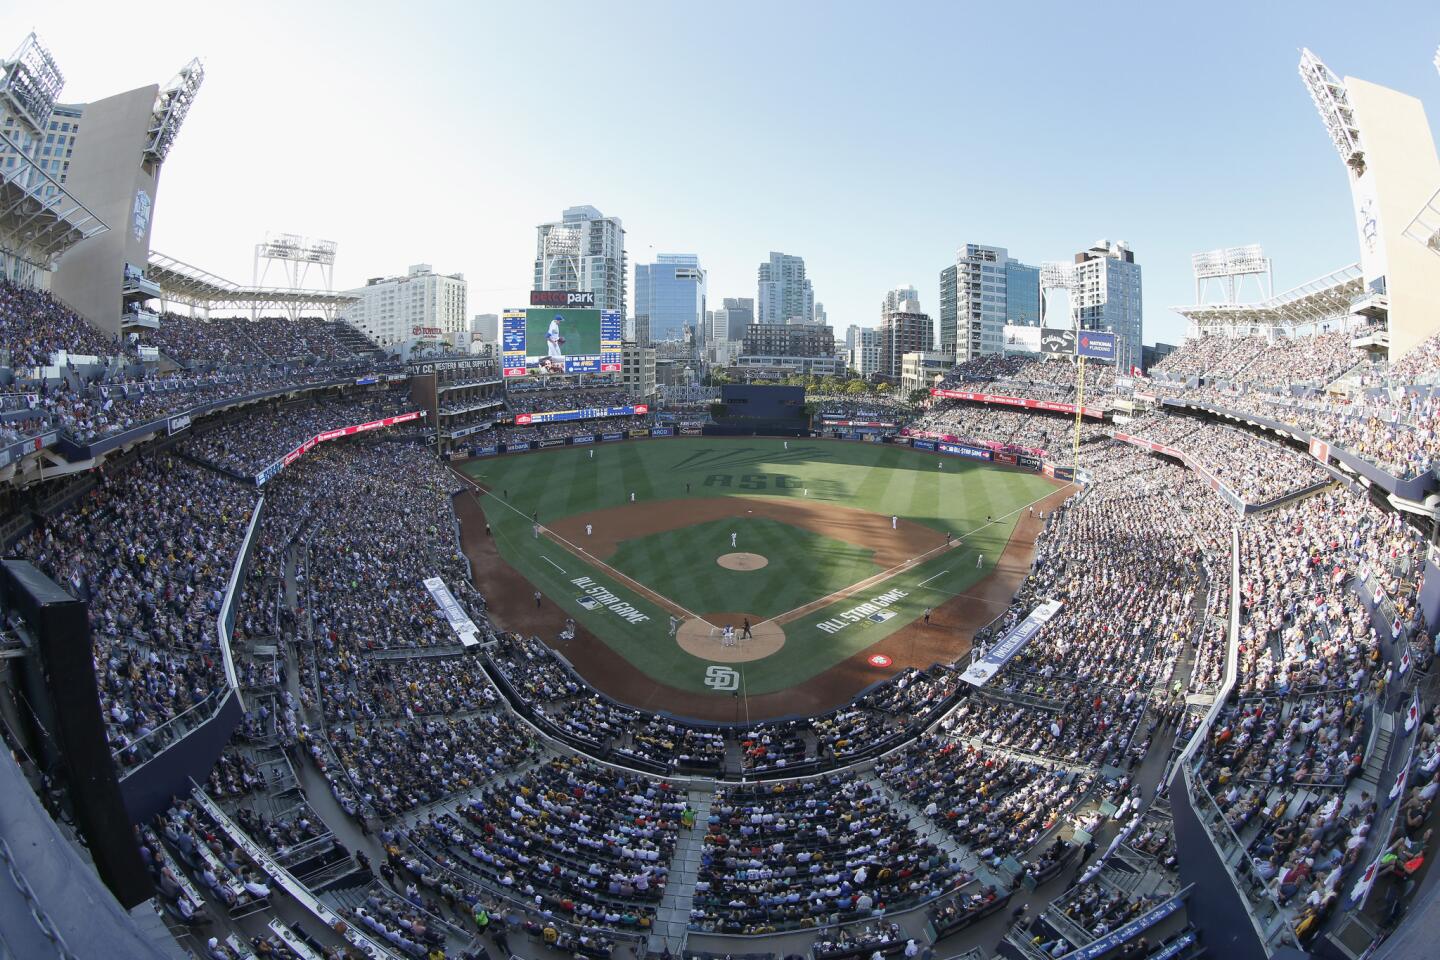 SAN DIEGO, CA - JULY 12: A view of the ball park during the 87th Annual MLB All-Star Game at PETCO Park on July 12, 2016 in San Diego, California. (Photo by Todd Warshaw/Getty Images) ** OUTS - ELSENT, FPG, CM - OUTS * NM, PH, VA if sourced by CT, LA or MoD **